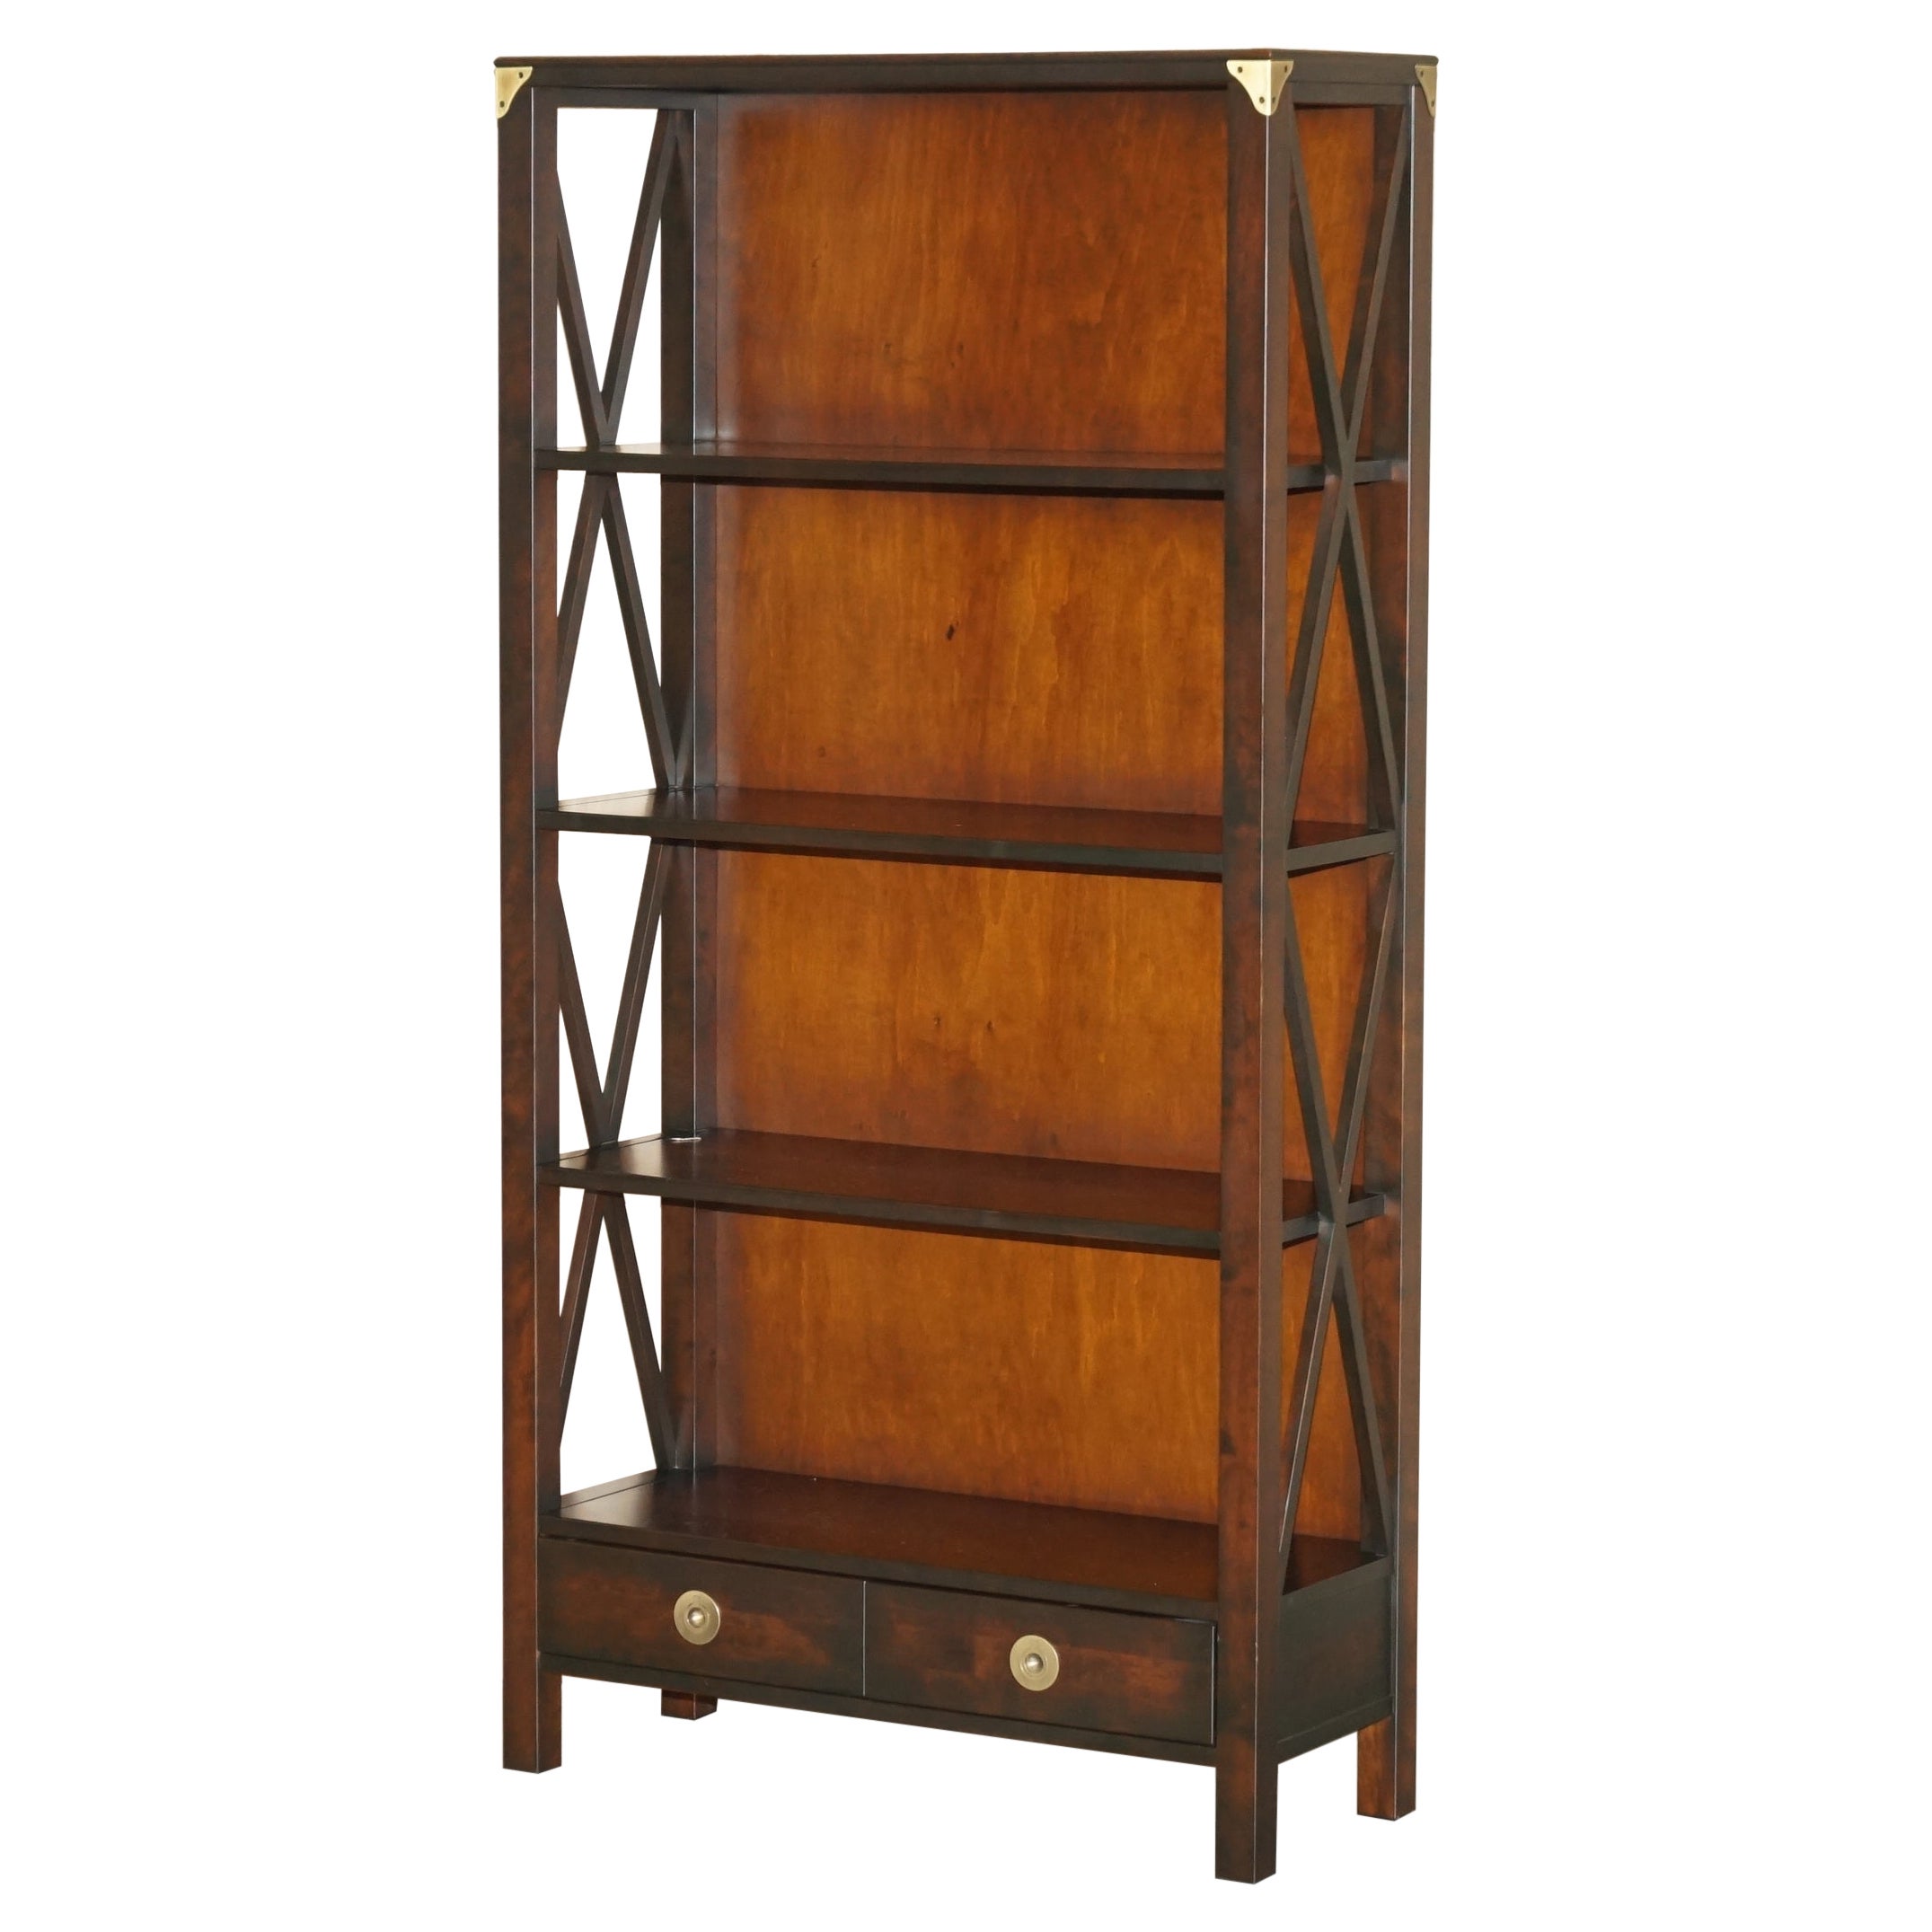 1 Of 2 Laura Ashley Hardwood and Brass Military Campaign Bookcases with Drawers For Sale